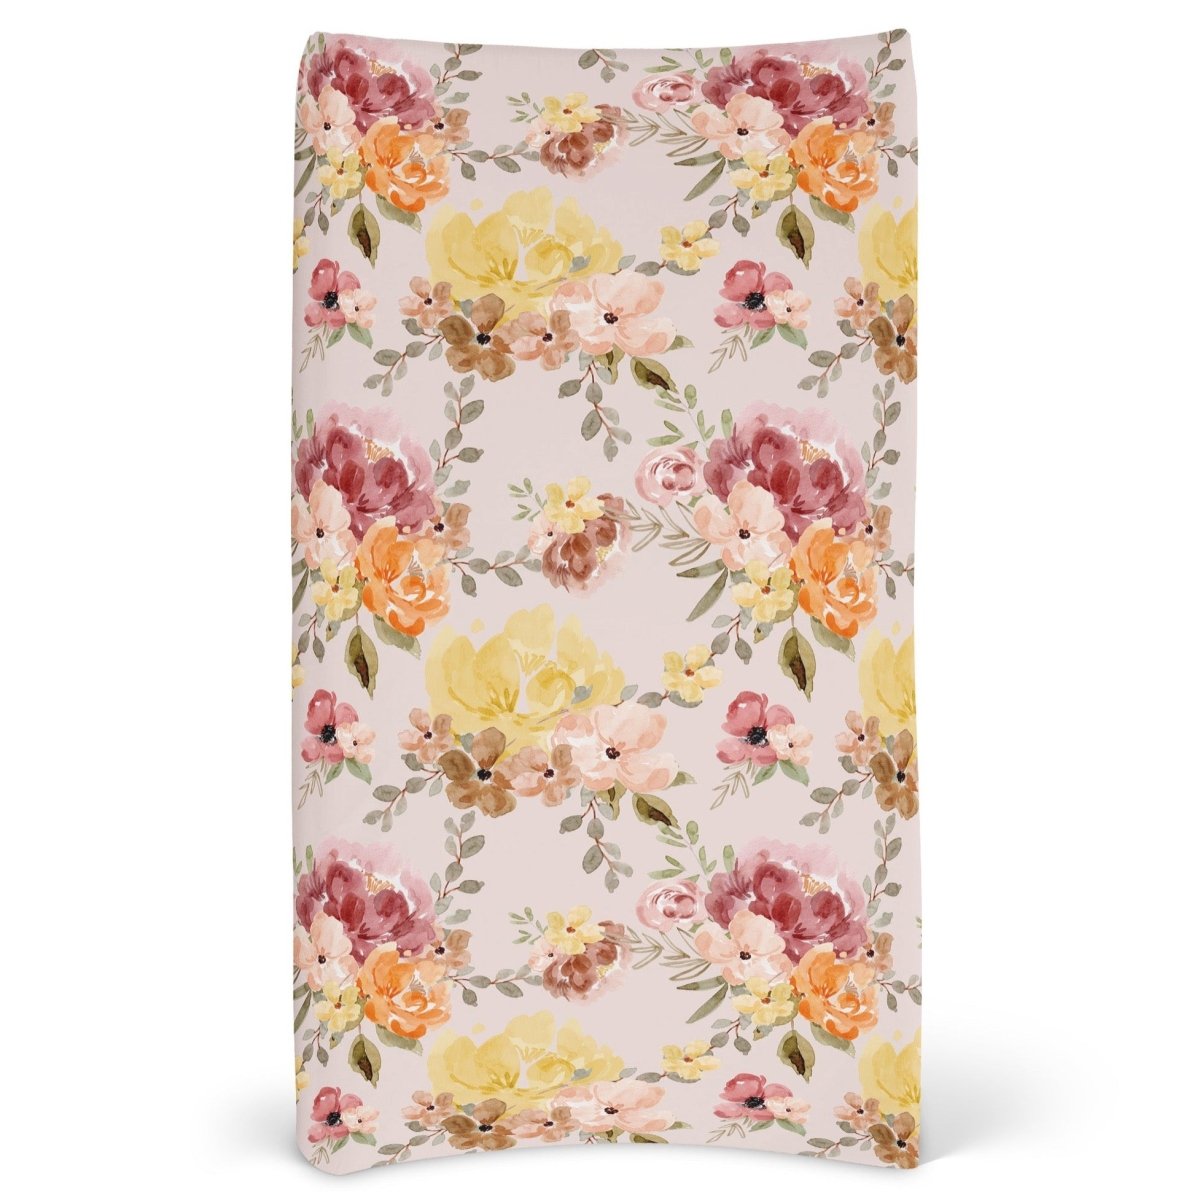 Highland Cow Wildflower Changing Pad Cover - gender_girl, Highland Cow Wildflower, Theme_Boho